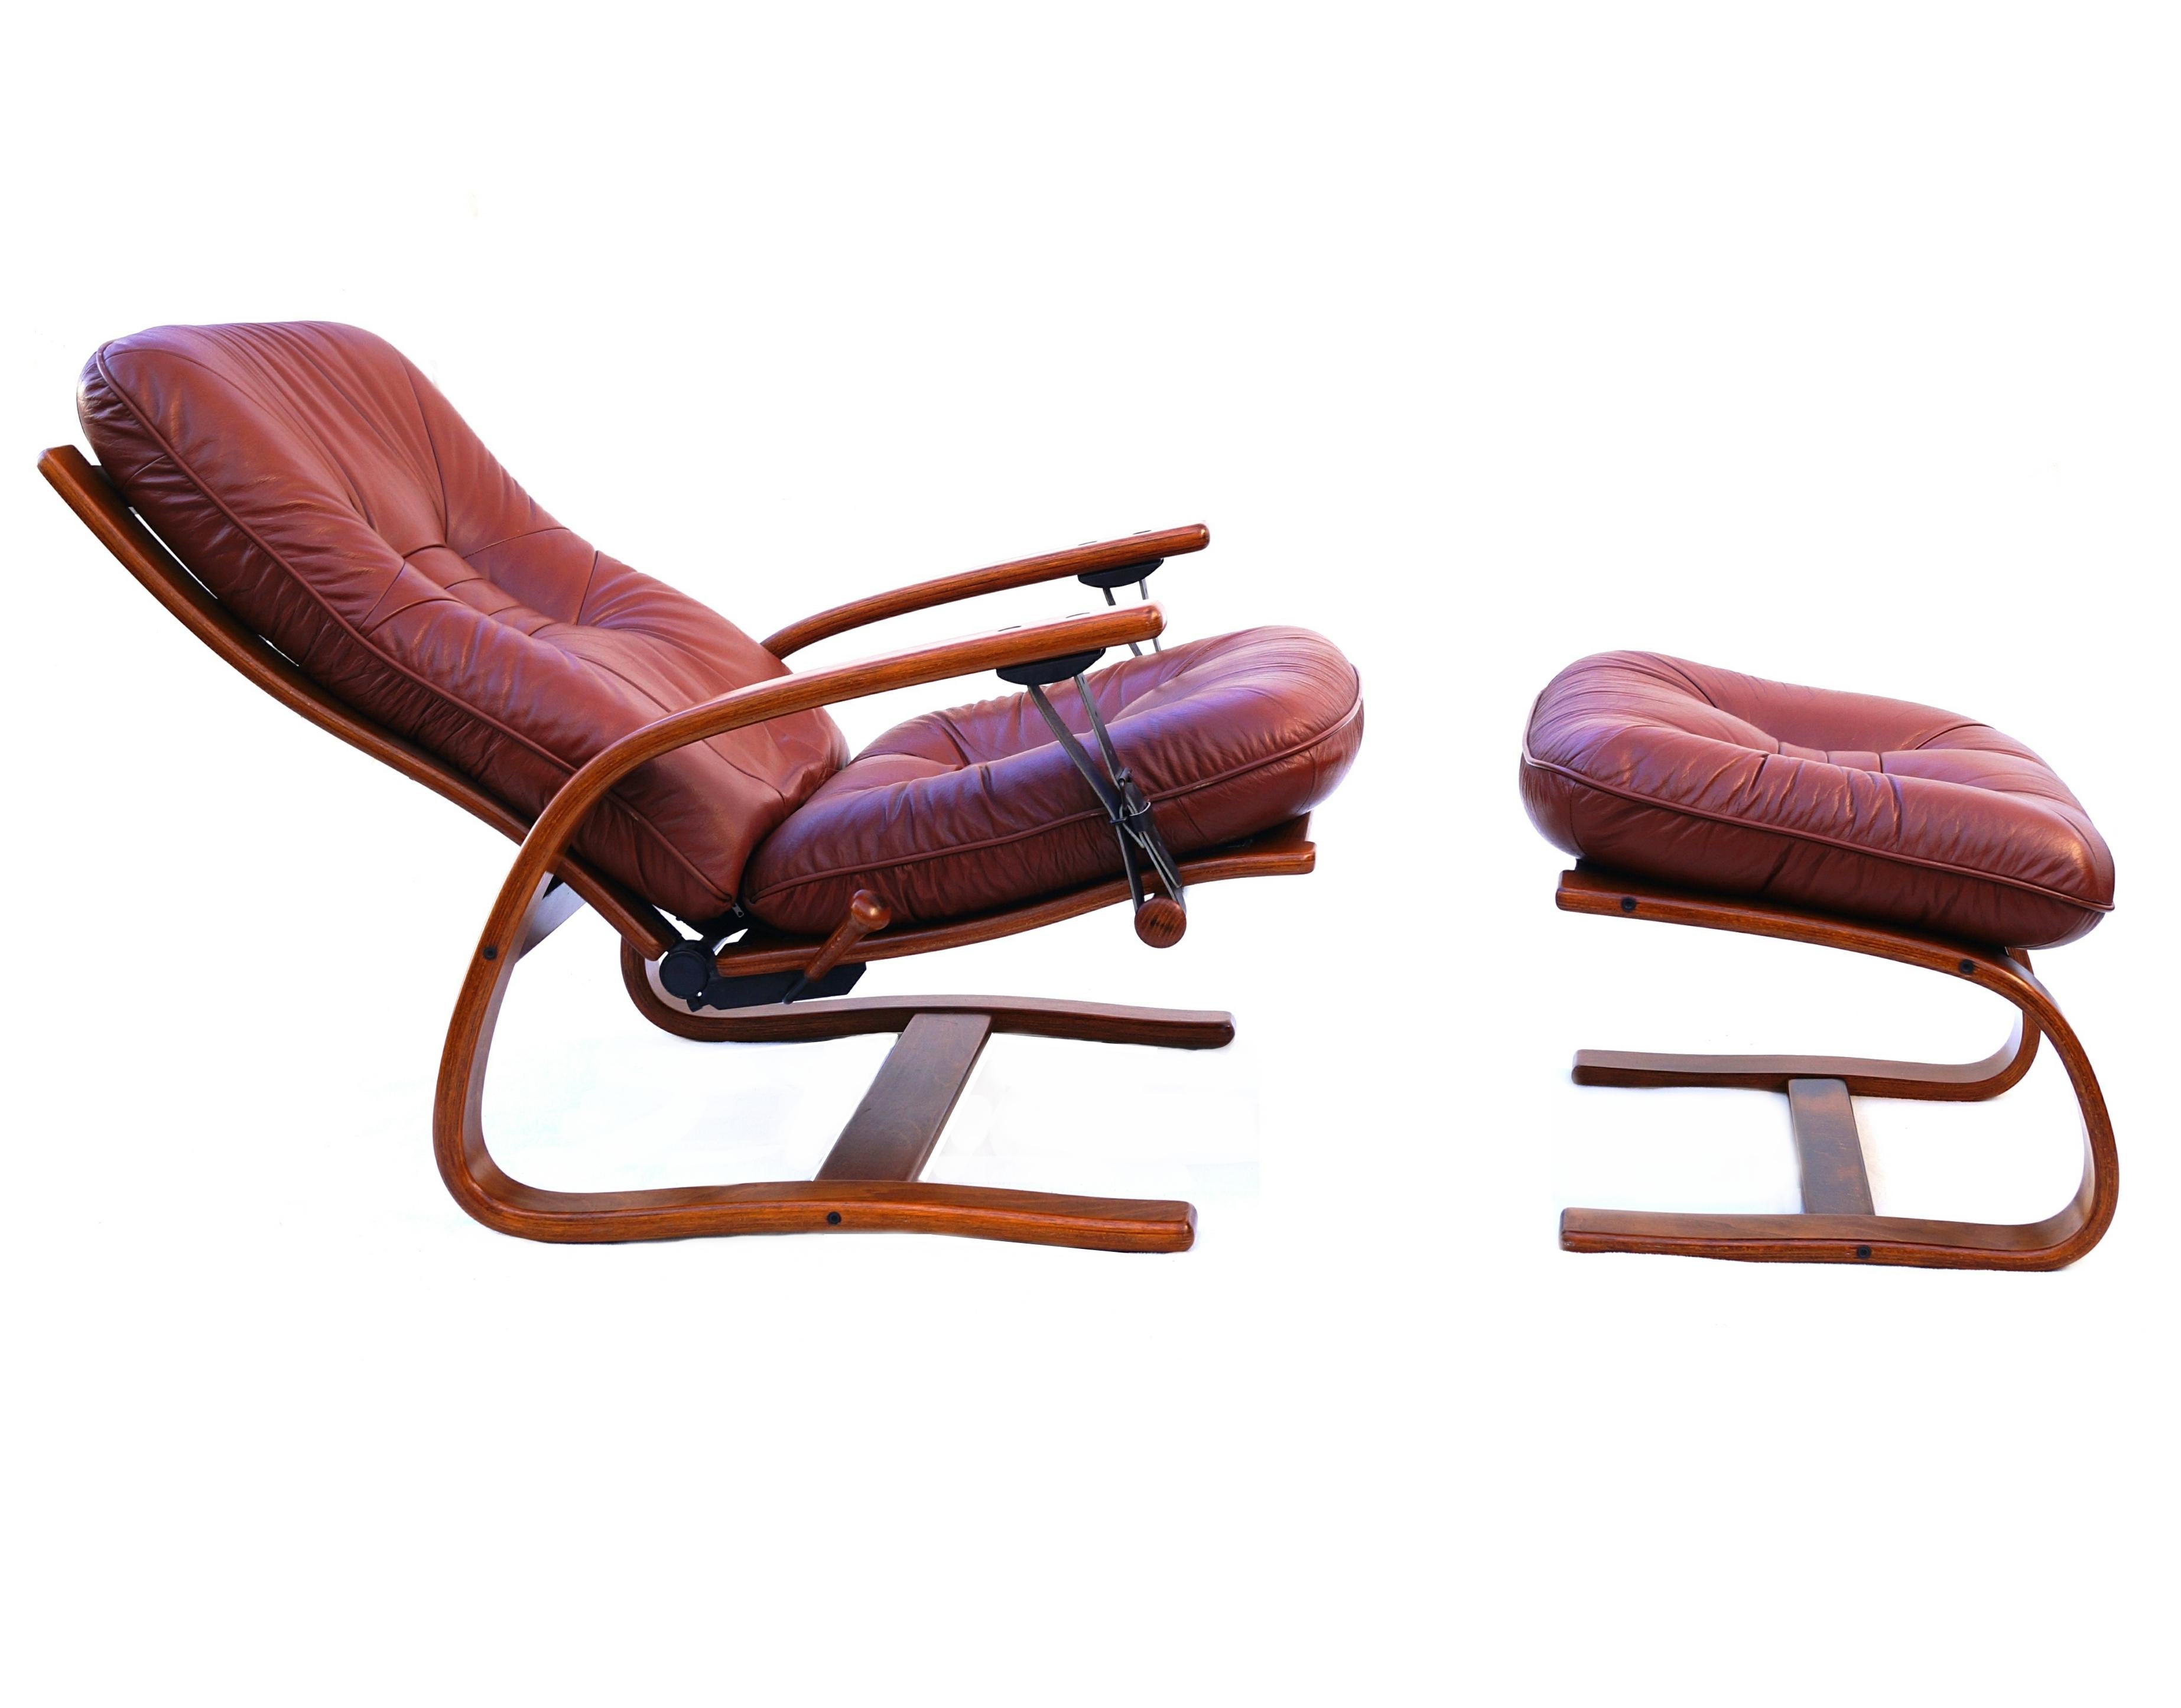 Westnofa leather reclining lounge chair and ottoman by Ingmar Relling. The ottoman measures 23